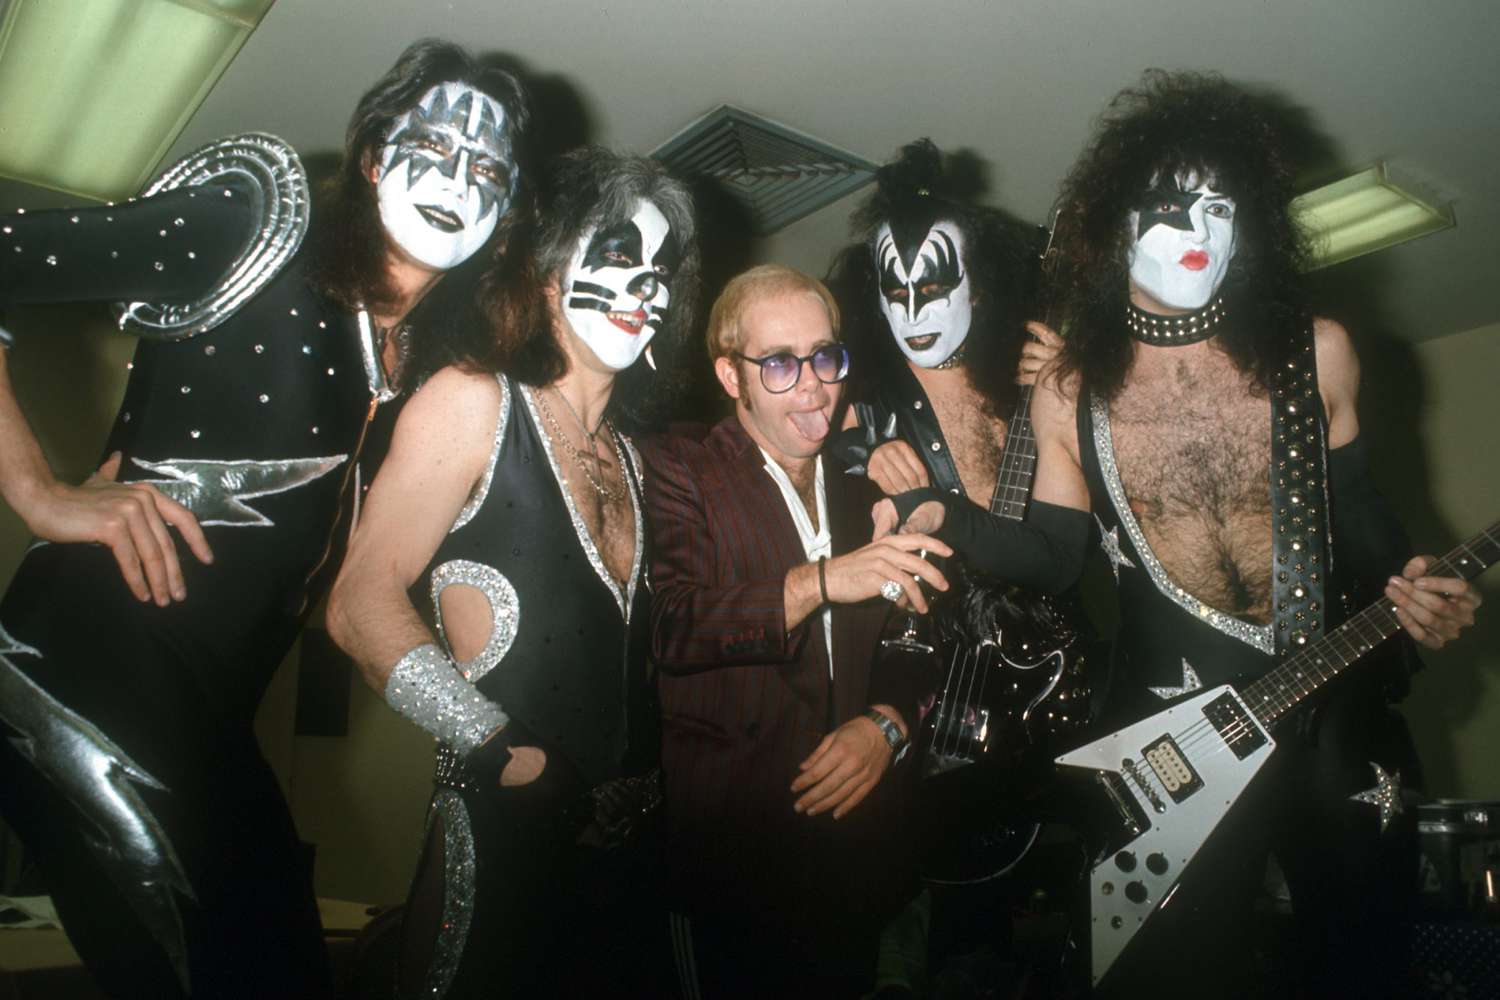 Pop singer Elton John poses for a portrait with the rock band 'Kiss' in full regalia in circa 1977 in Los Angeles, California. (L-R) Ace Frehley, Peter Criss, Elton John, Gene Simmons, Paul Stanley